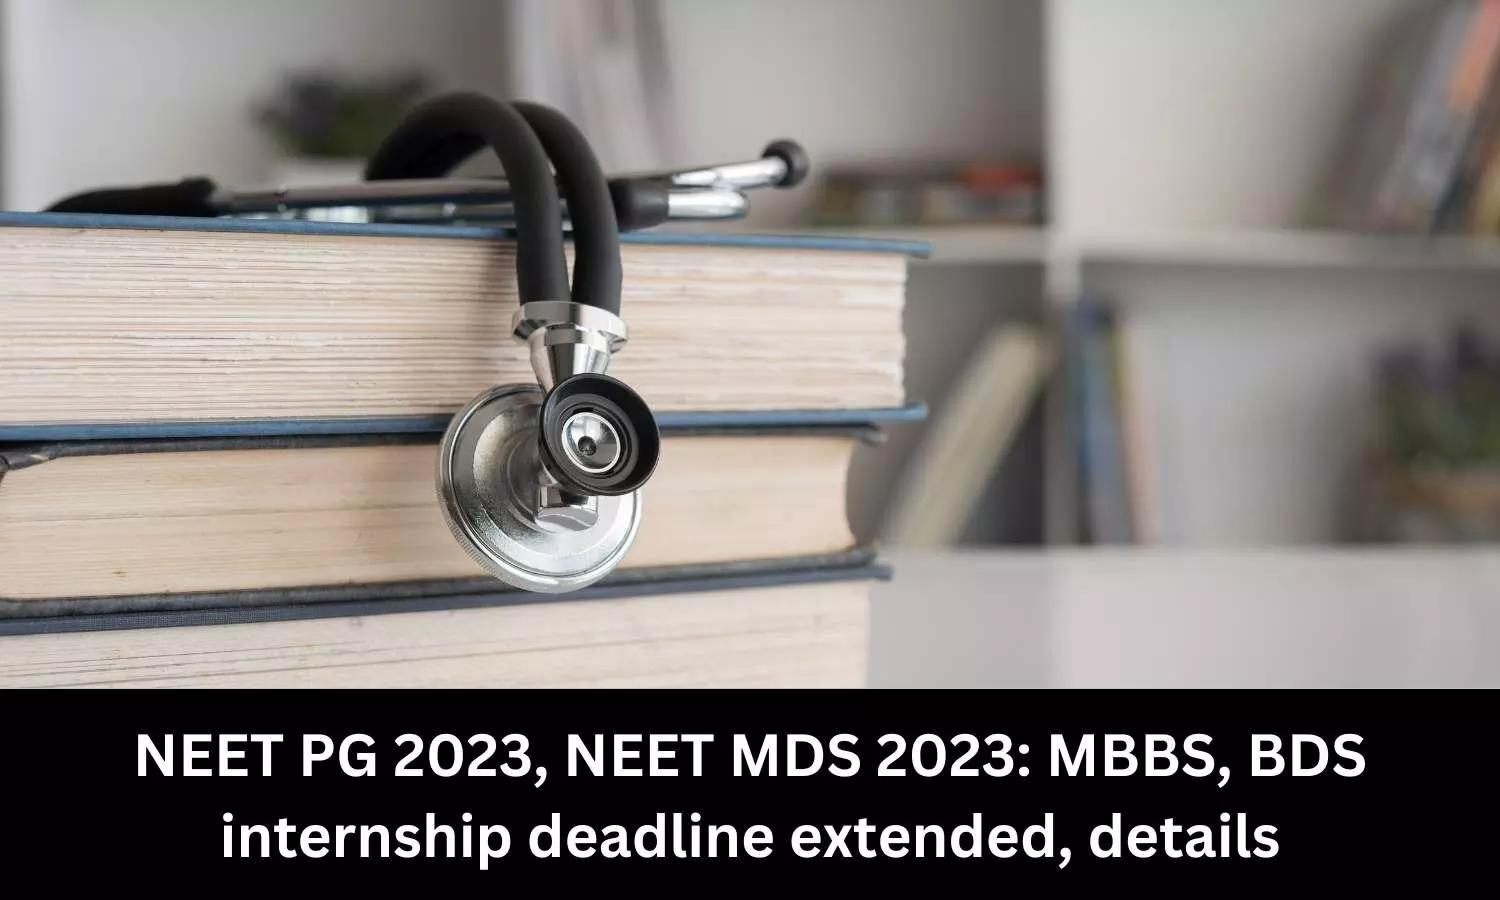 Health Ministry extends cut off date of completion of MBBS, BDS internship, details